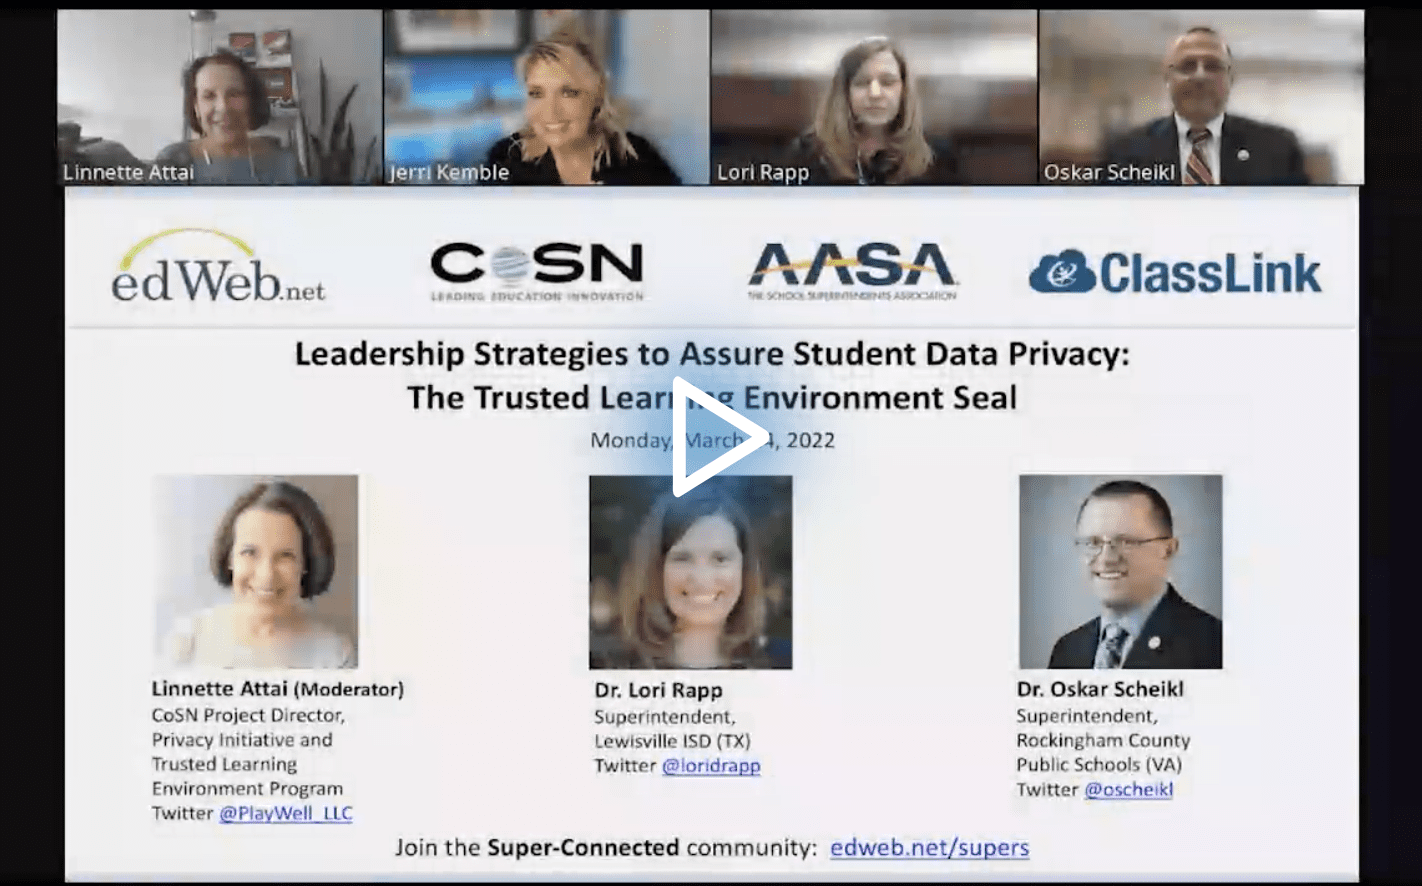 Leadership Strategies to Assure Student Data Privacy: The Trusted Learning Environment Seal edWebinar recording link